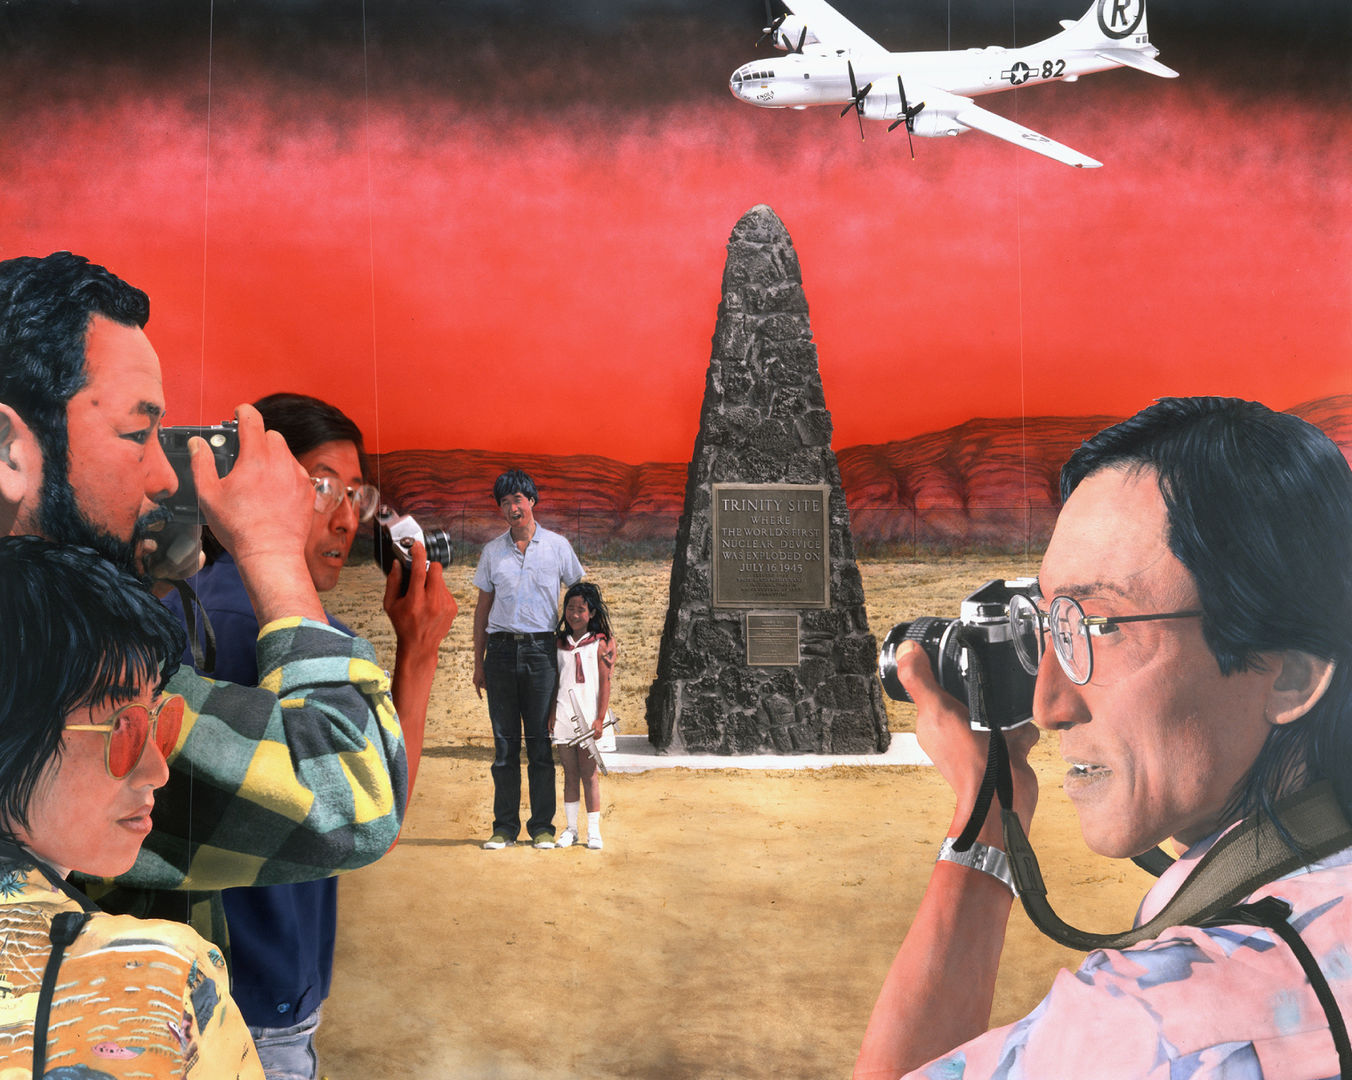 A man and young girl pose next to a nuclear memorial for a group of several photographers